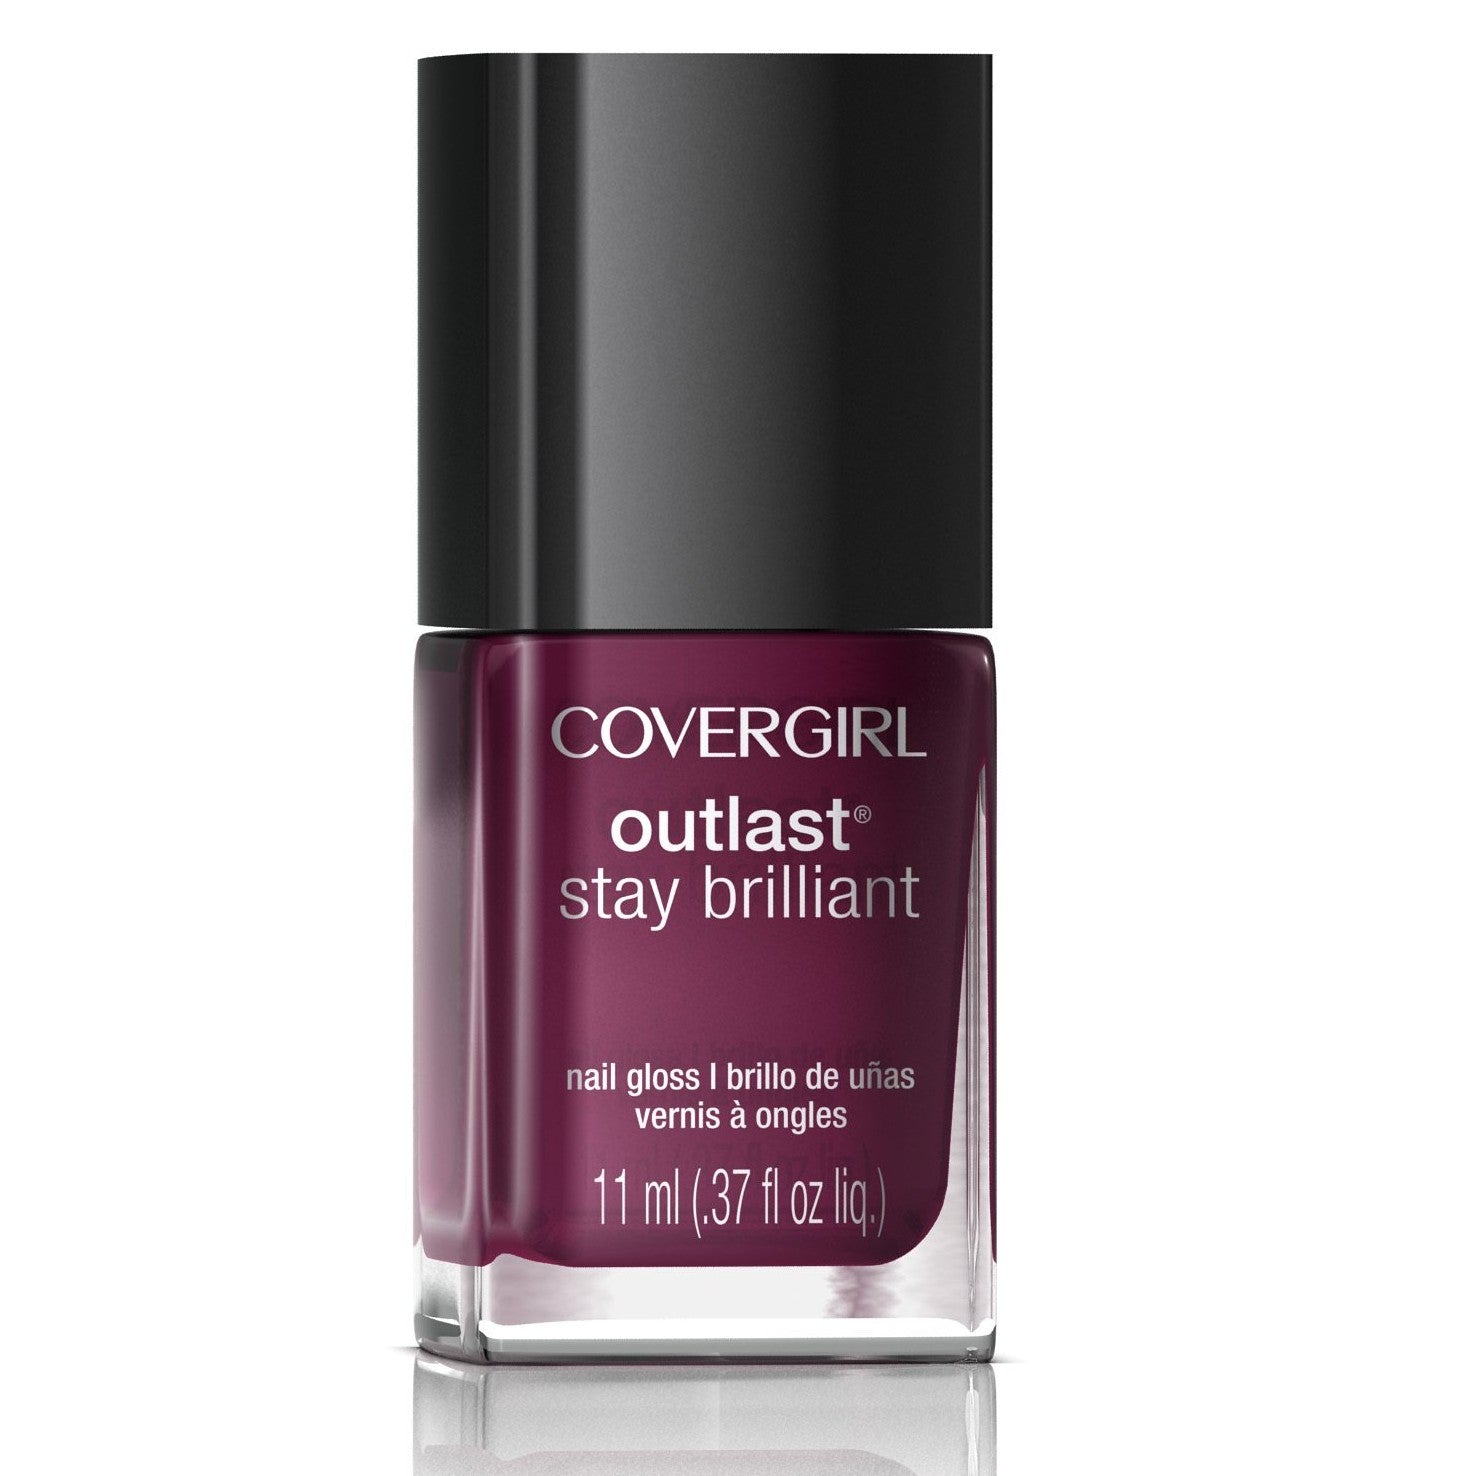 COVERGIRL Outlast Stay Brilliant Nail Gloss